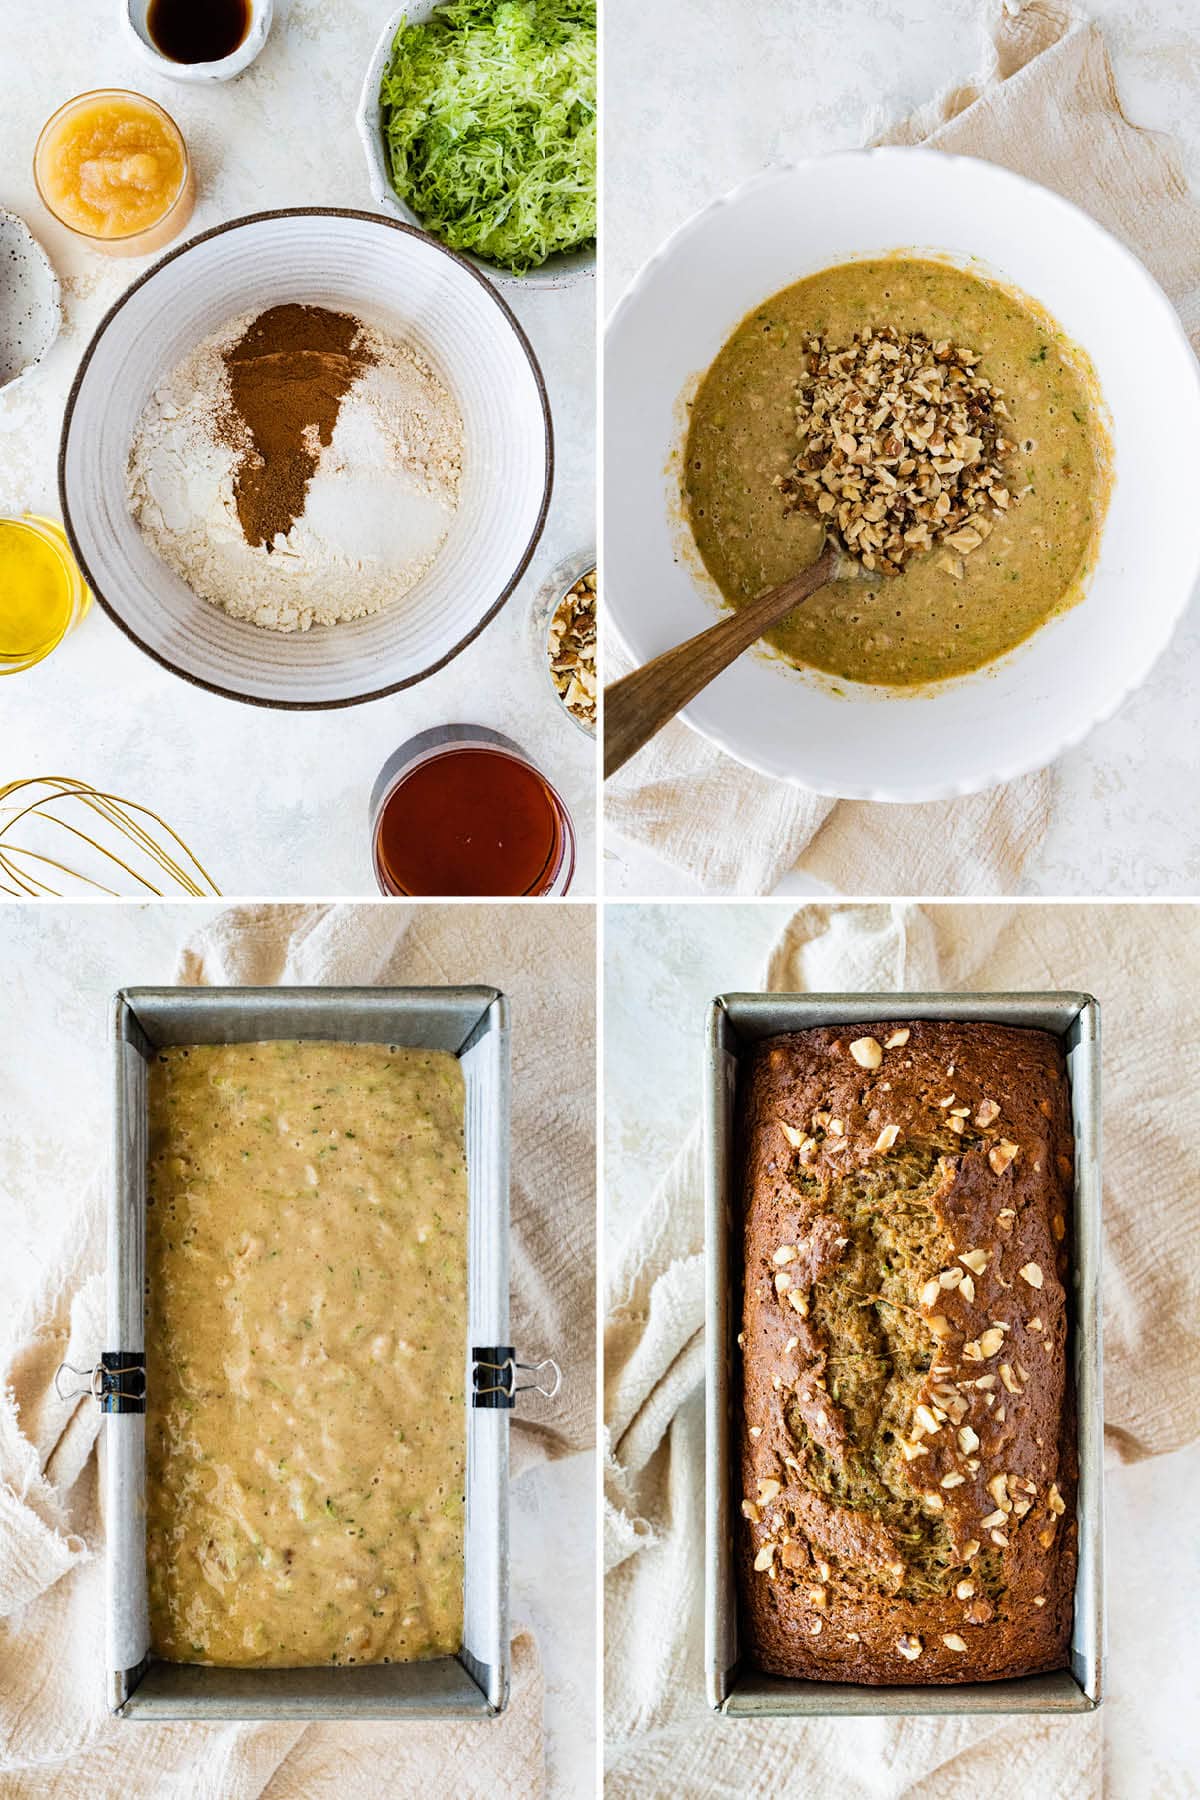 Collage of four photos showing how to make Healthy Zucchini Bread: mixing the batter and then baking in a loaf pan.